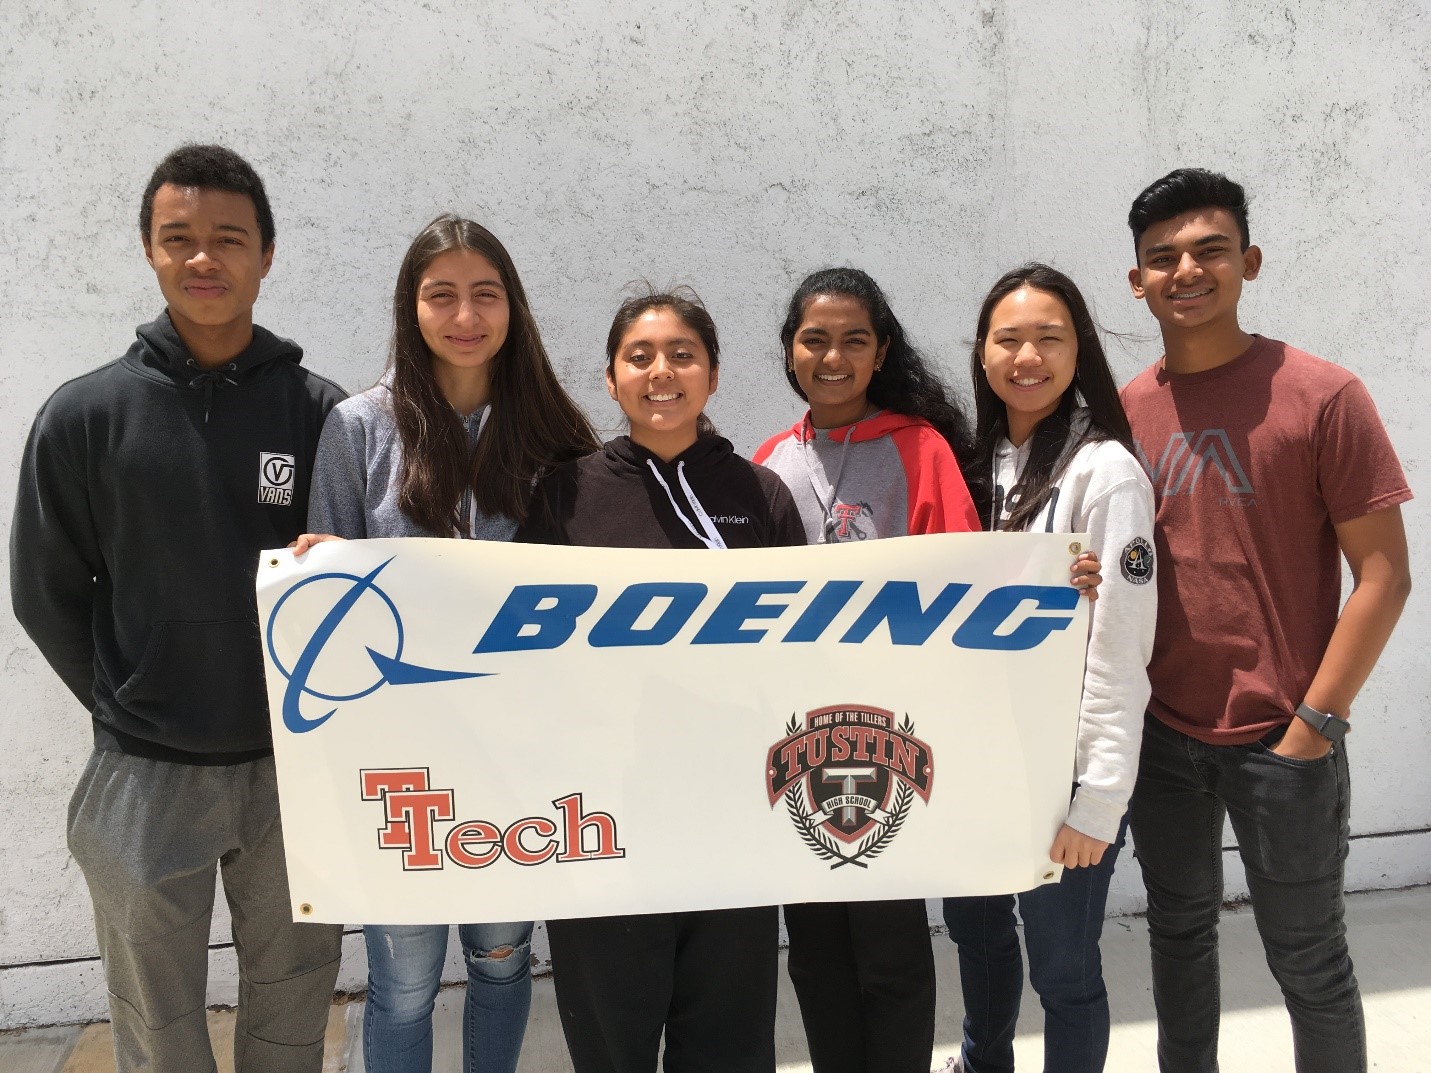 Tustin students at Boeing